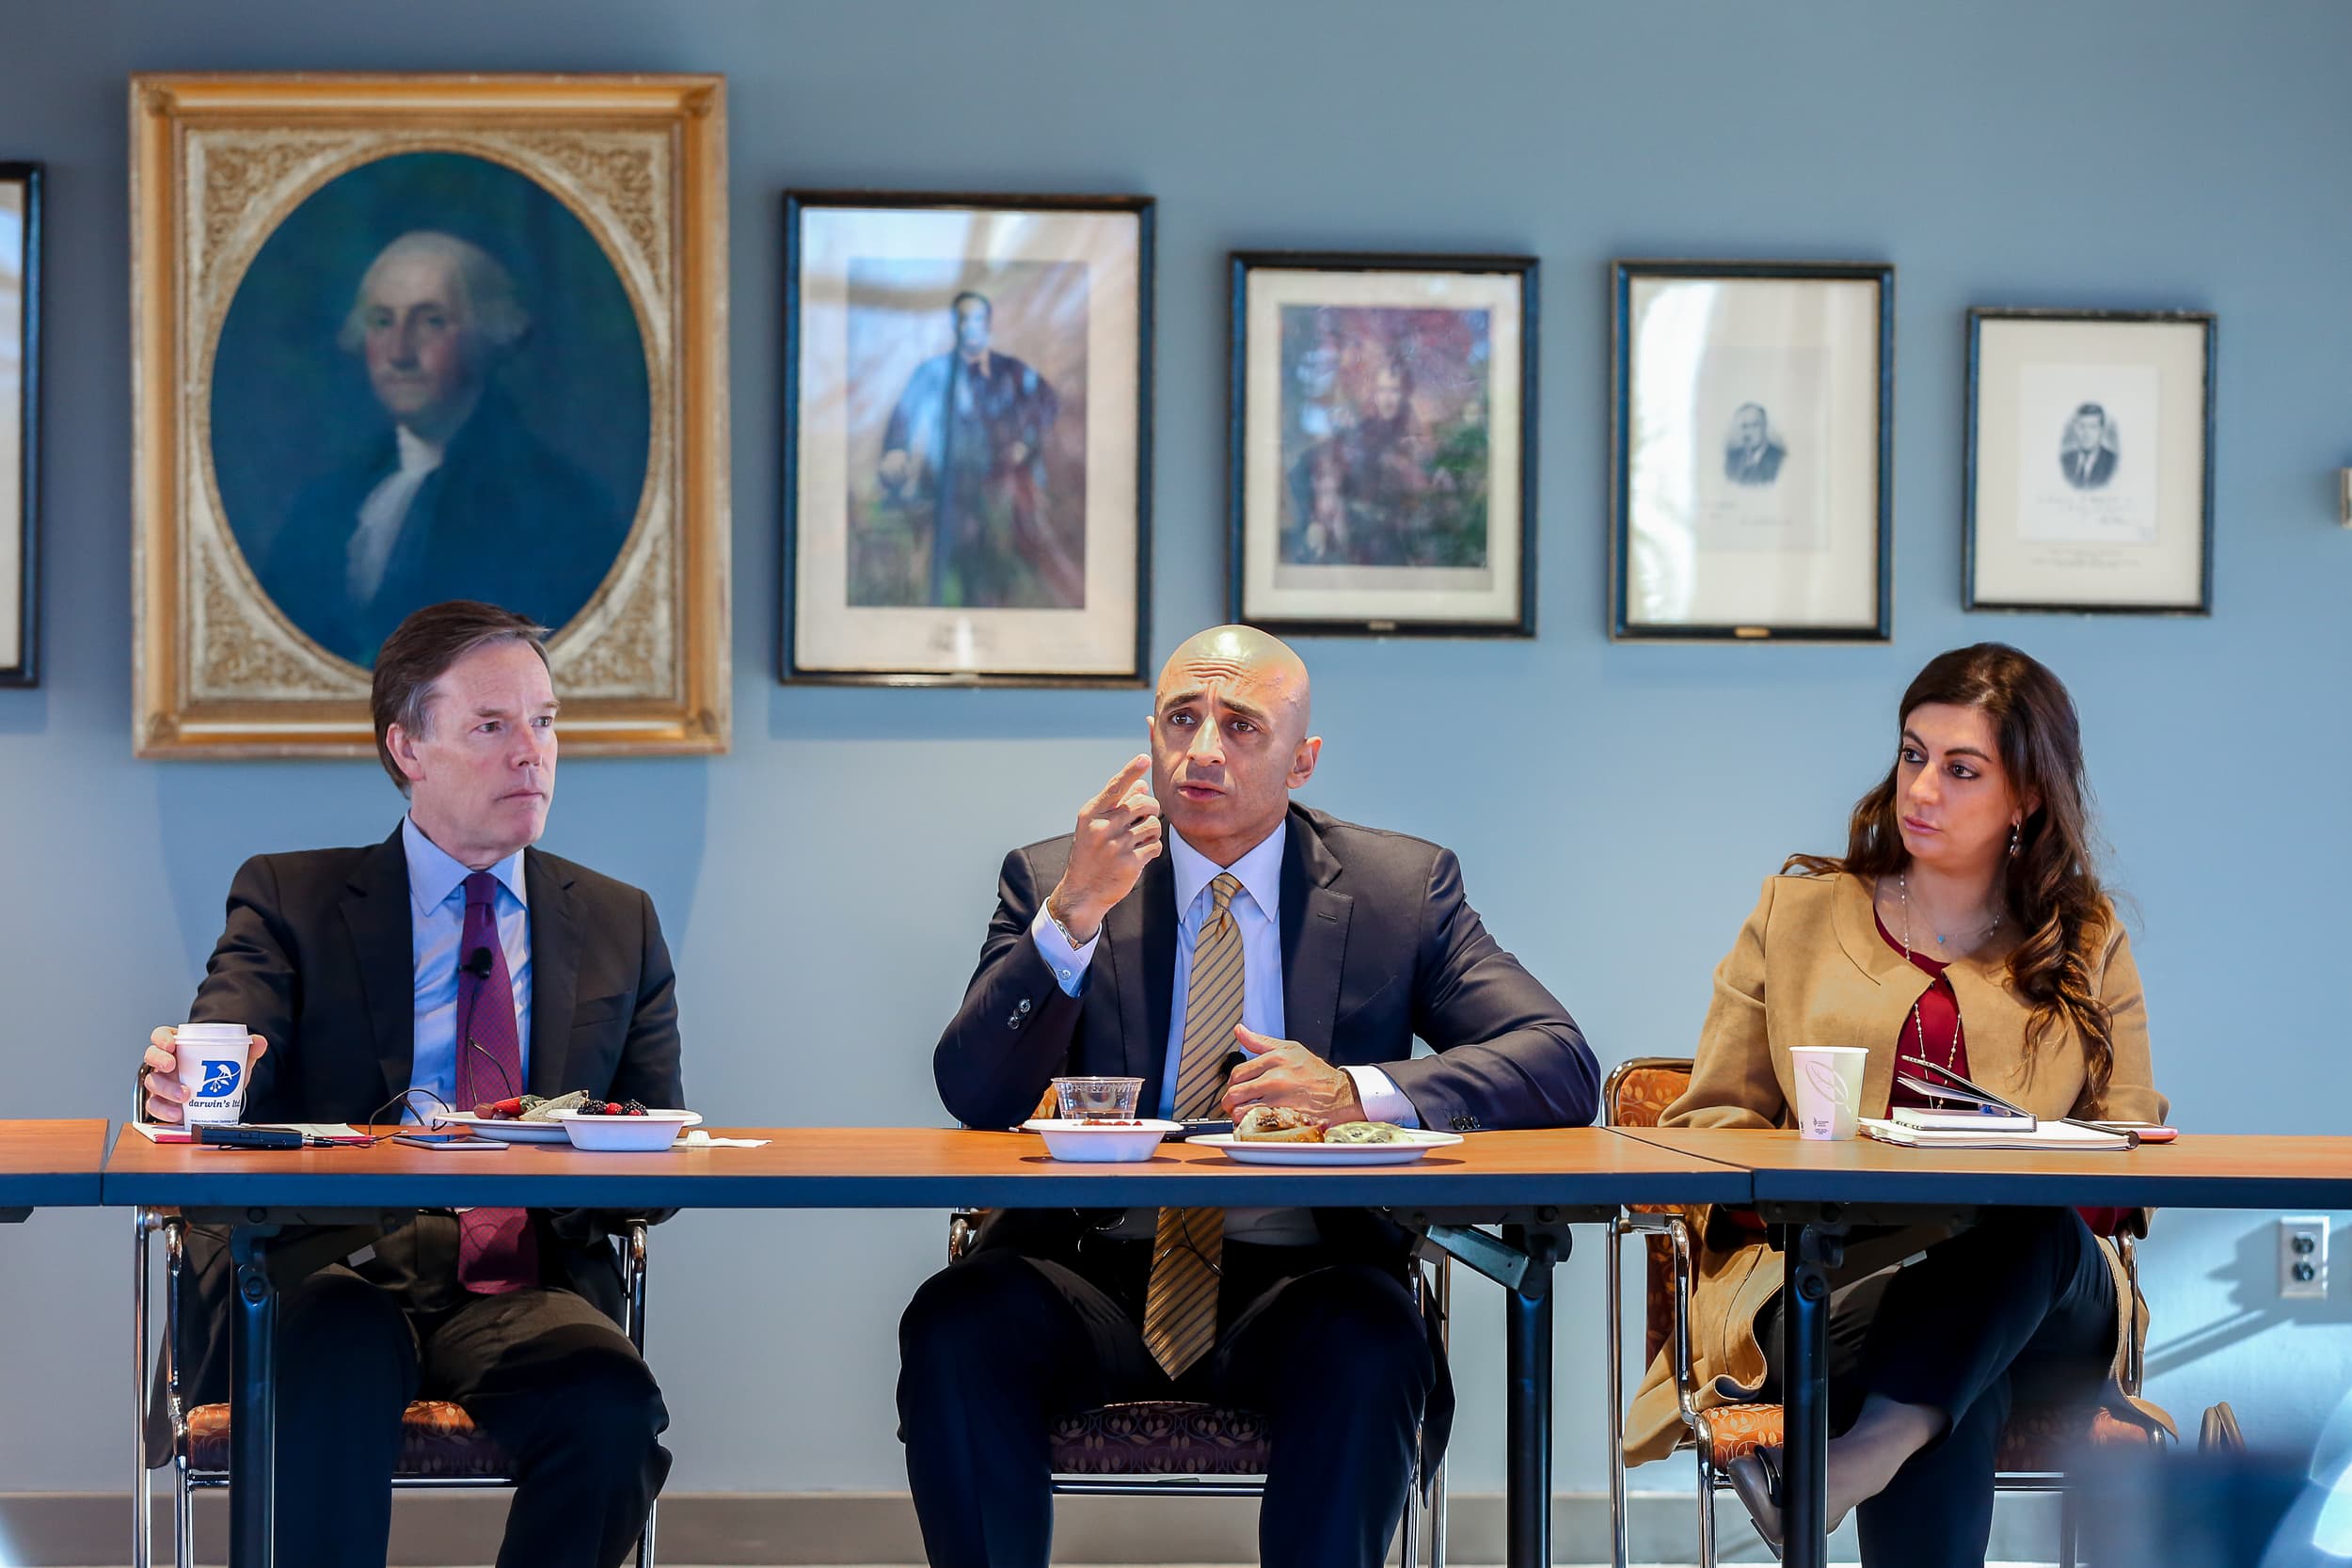 Ambassador Yousef Al Otaiba, Senior Visiting Fellow speaks with Harvard Kennedy School students at Professor Nicholas Burns' class on #UAEUSA partnerships, countering violent extremism and a range of international relations issues during the ambassador's outreach trip to Boston in October 2016